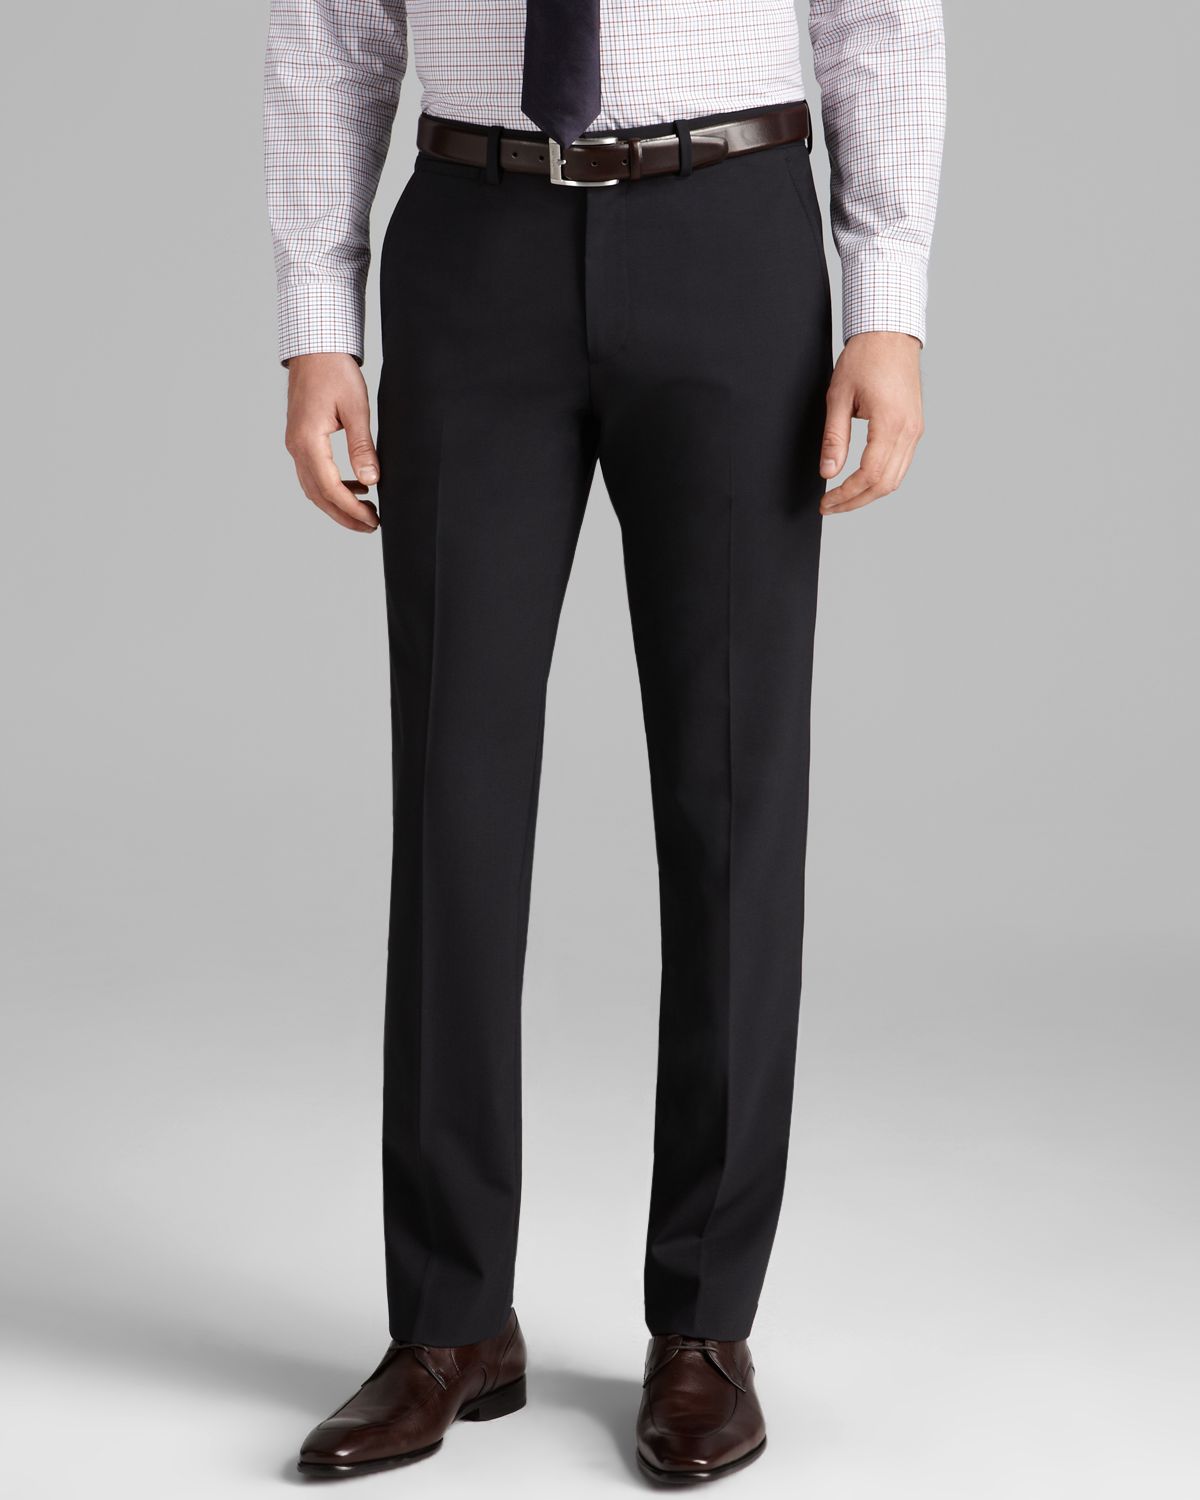 Theory Marlo New Tailor Trousers - Regular Fit in Black for Men - Lyst